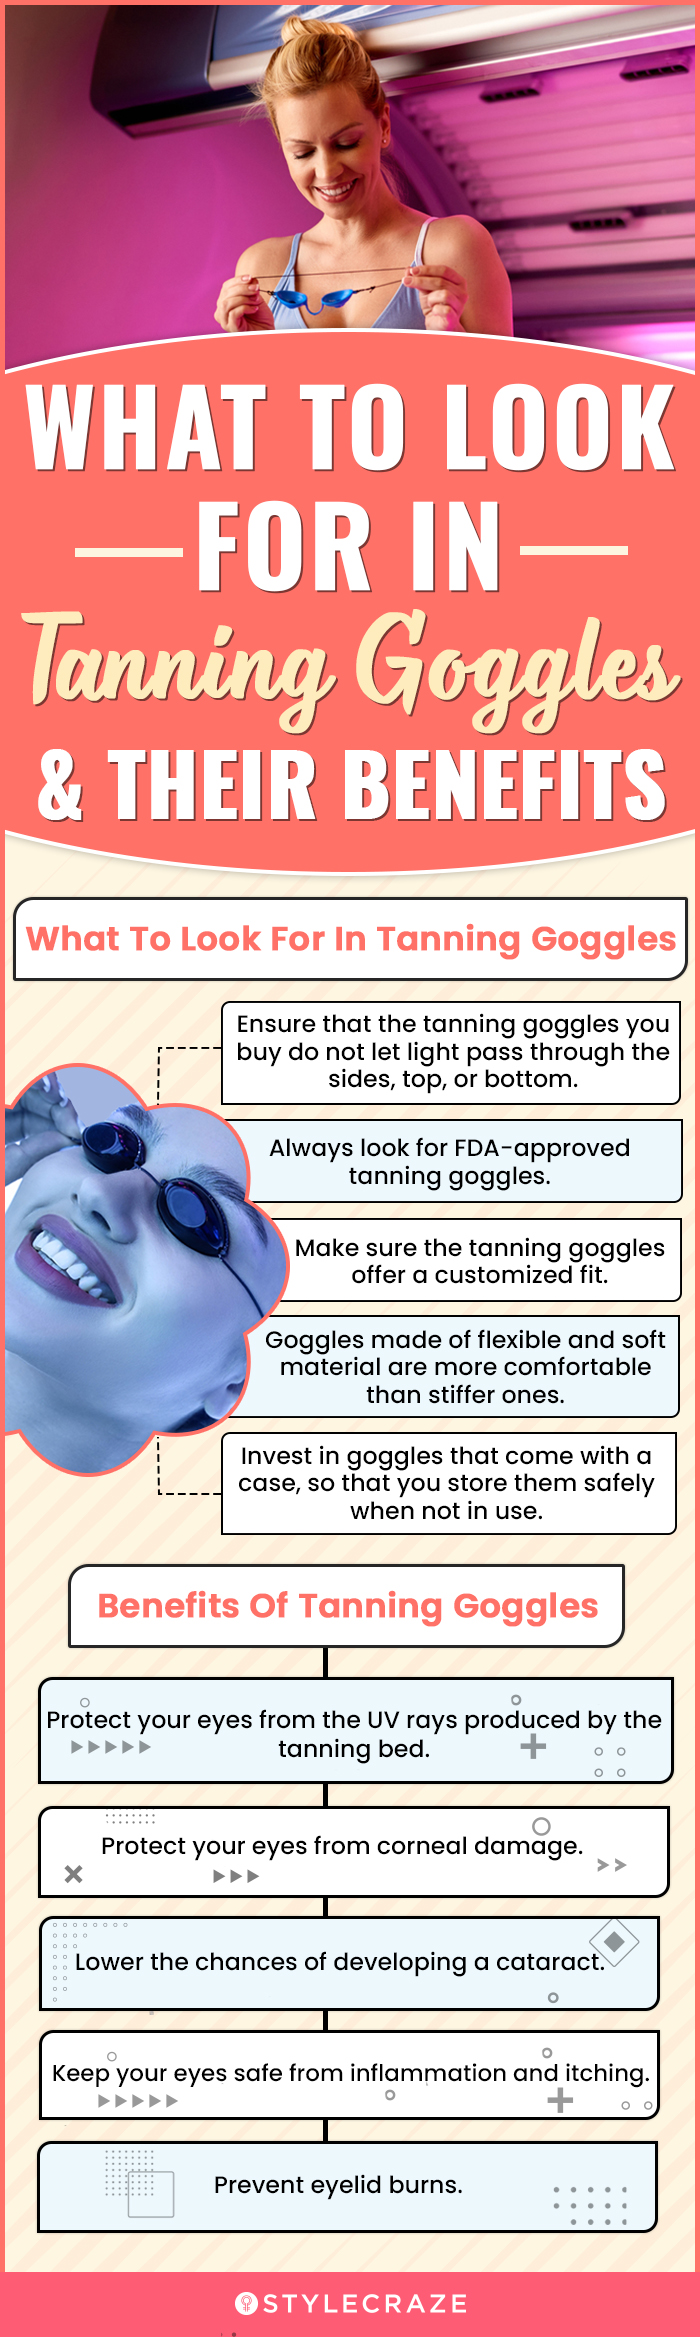 What To Look For In Tanning Goggles & Their Benefits (infographic)